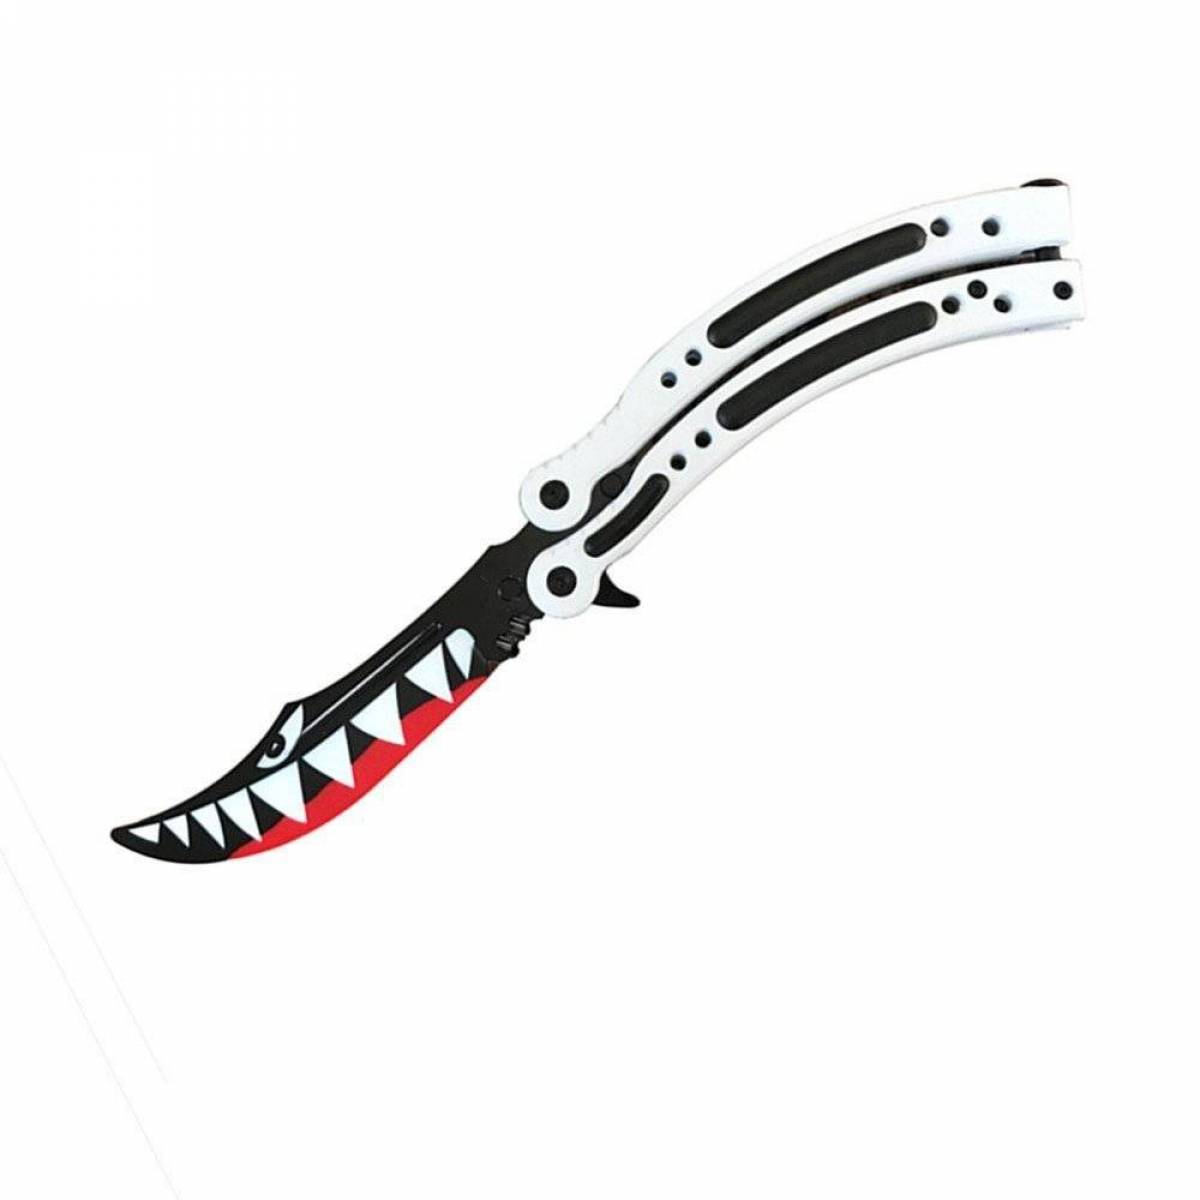 Creative coloring butterfly knife